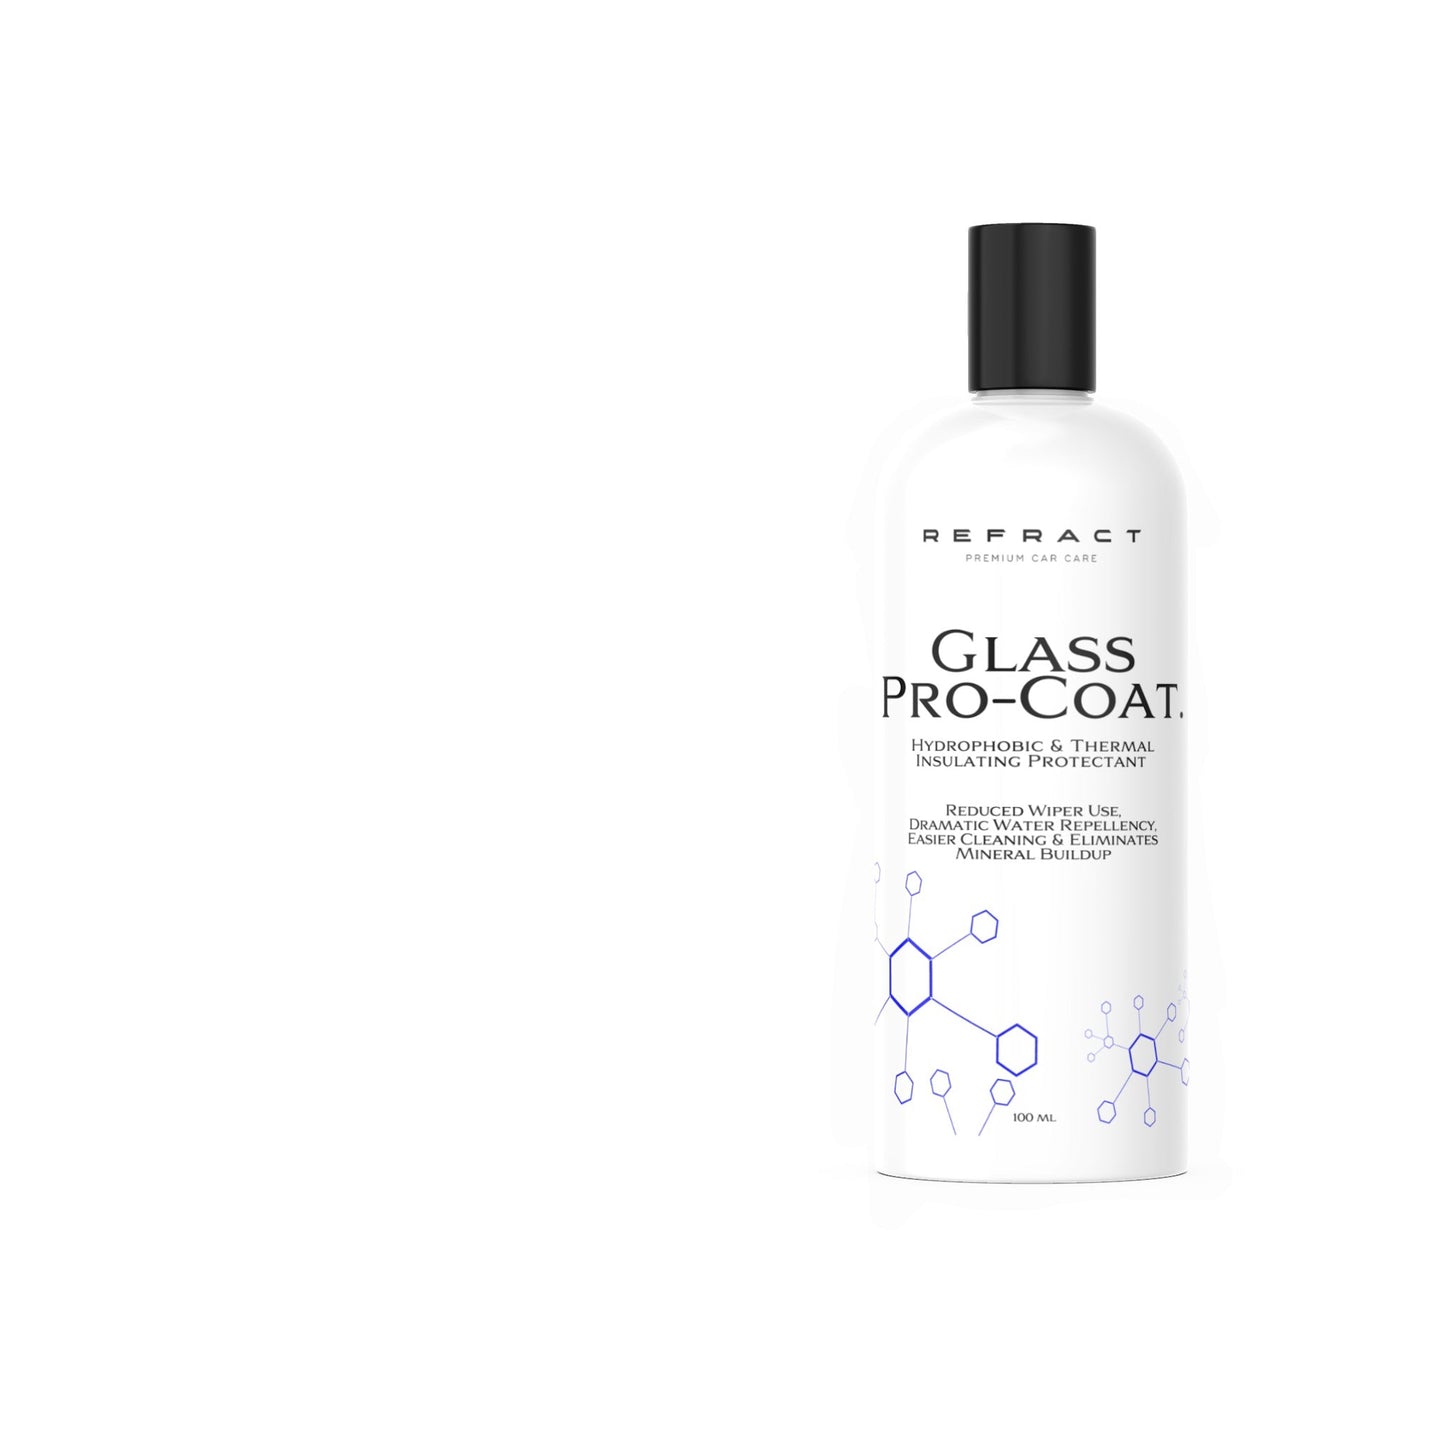 Refract Premium Car Care Products REFRACT Glass Pro Coat - 100ml $69.95